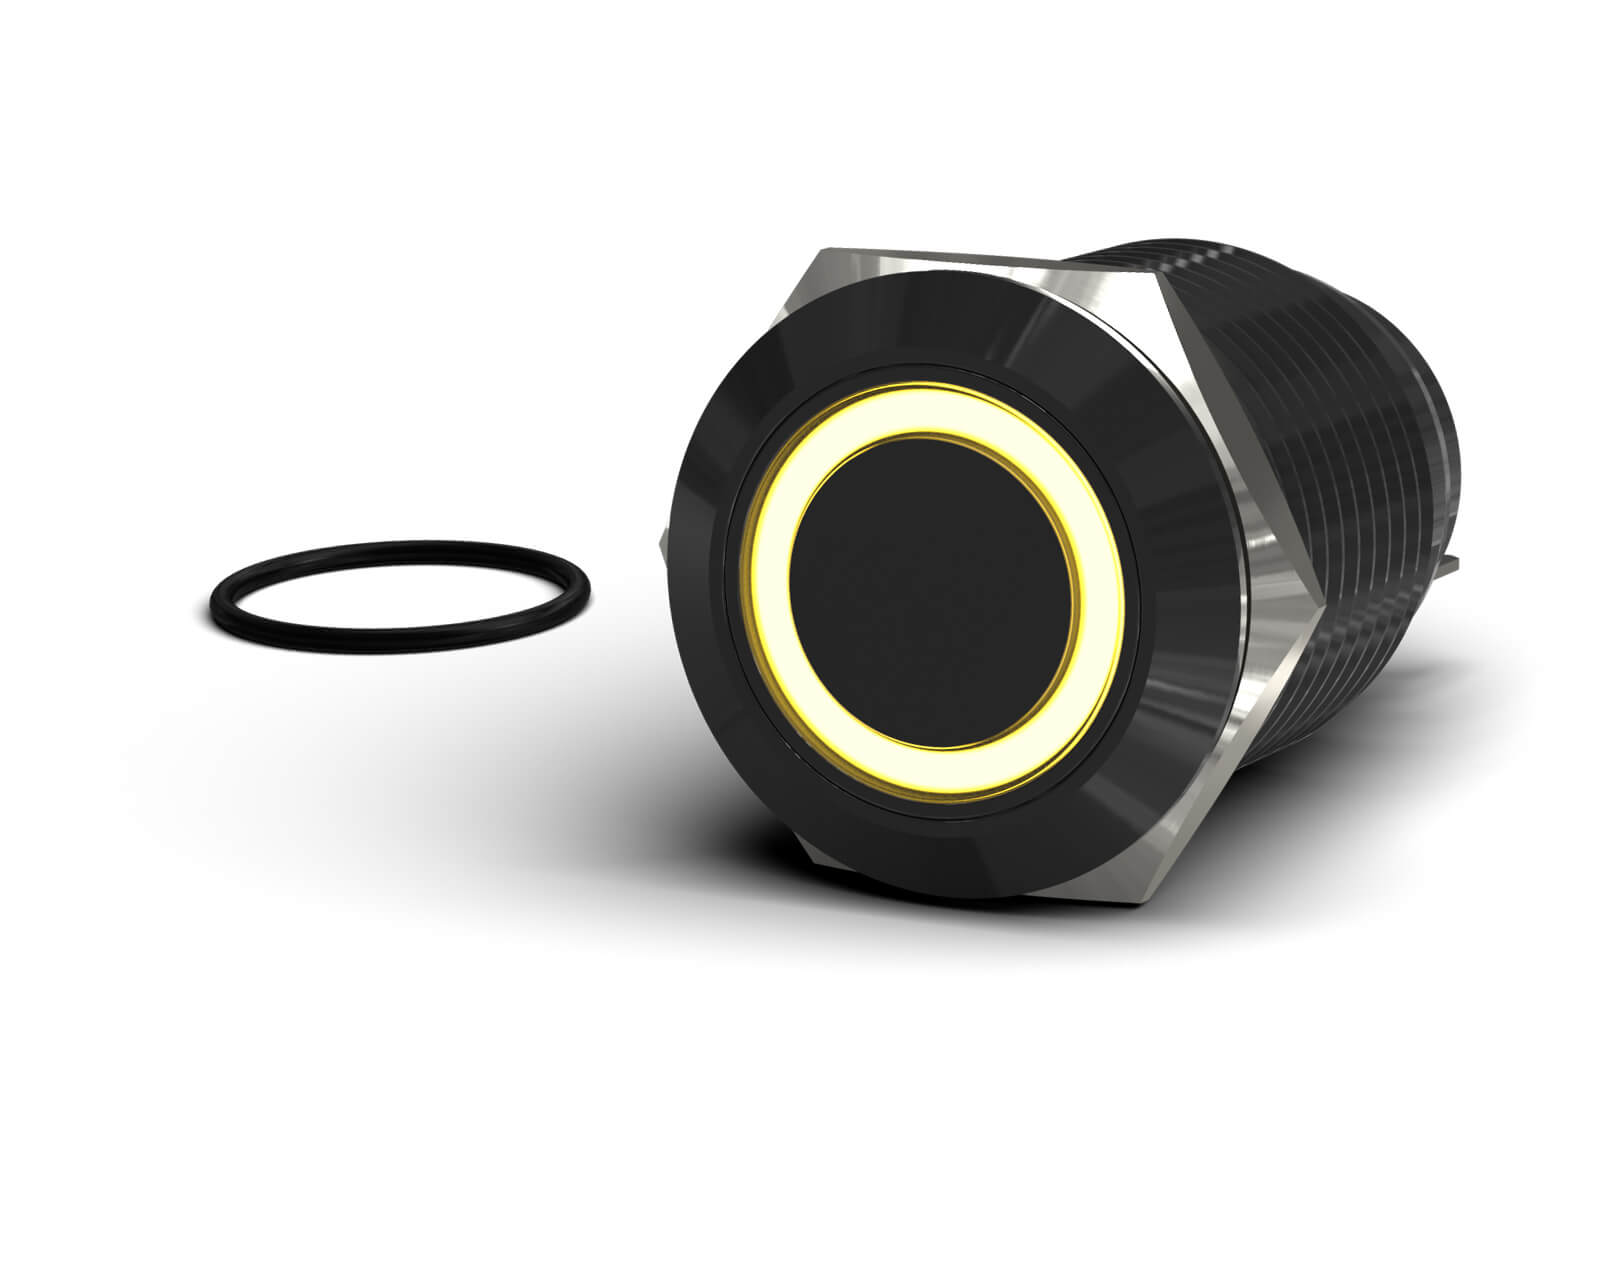 PrimoChill Black Aluminum Momentary Vandal Resistant Switch - 22mm - PrimoChill - KEEPING IT COOL Amber LED Ring